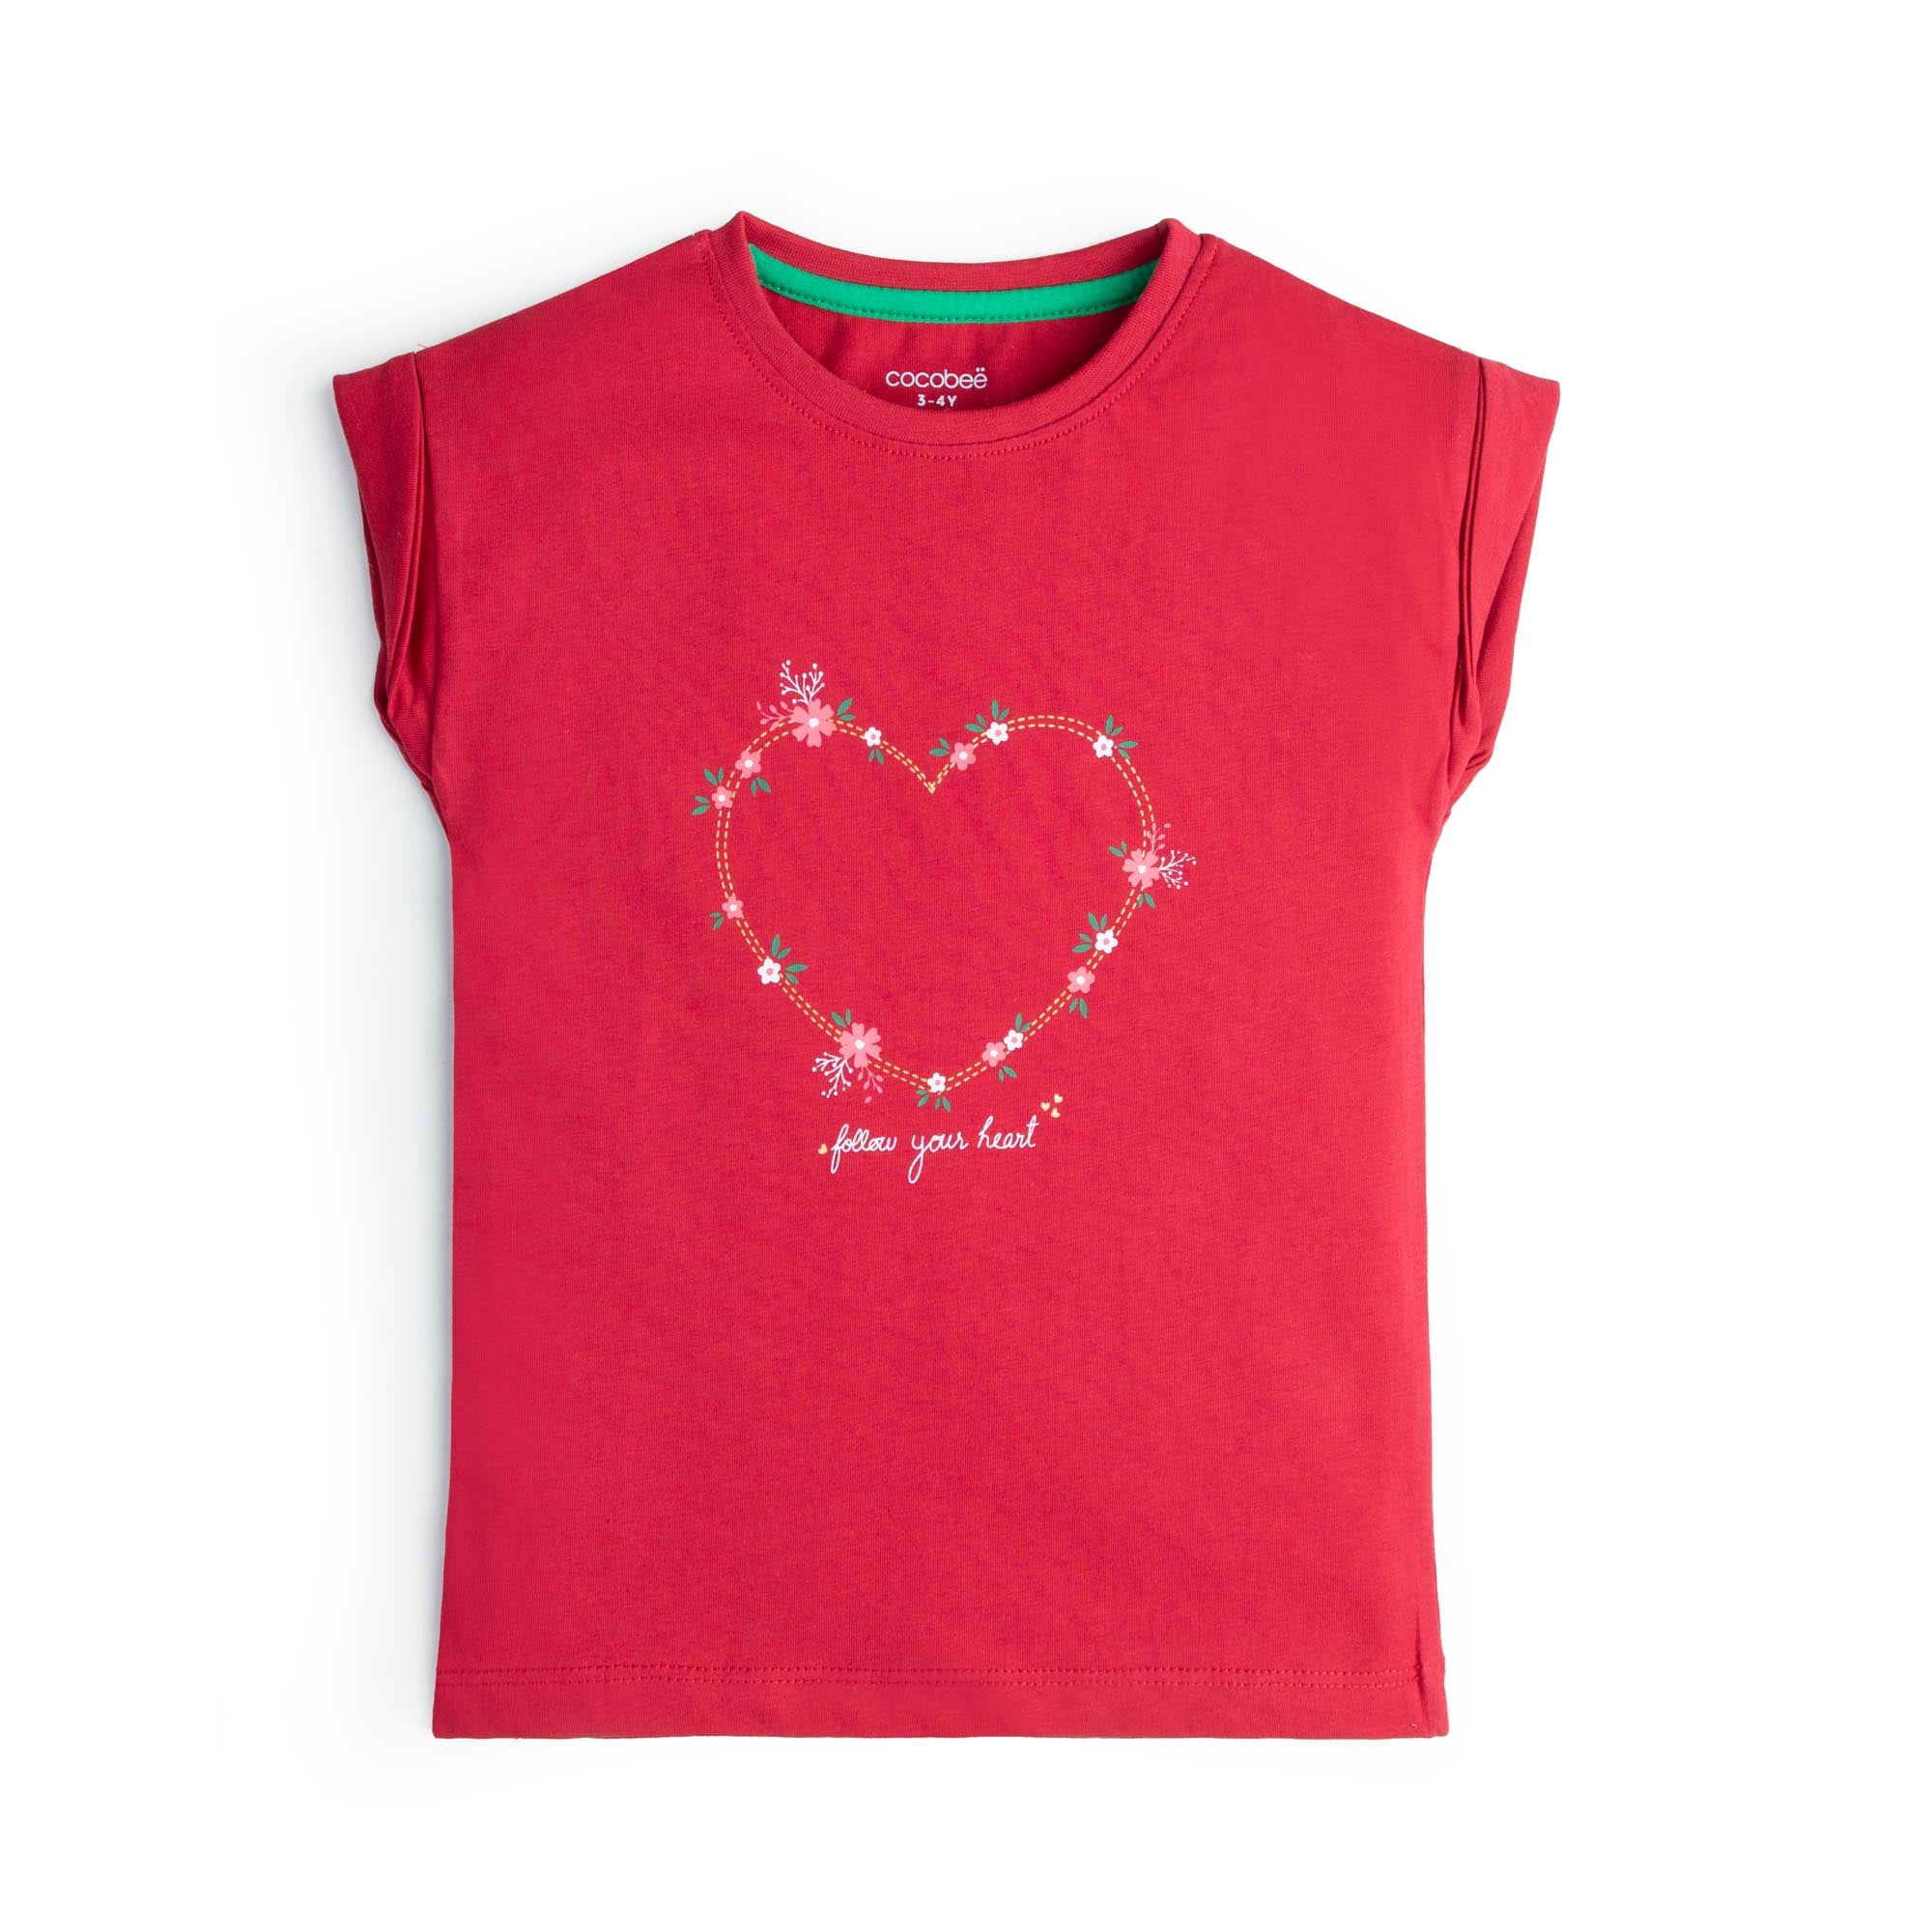 Hearty Red Graphic T-shirt